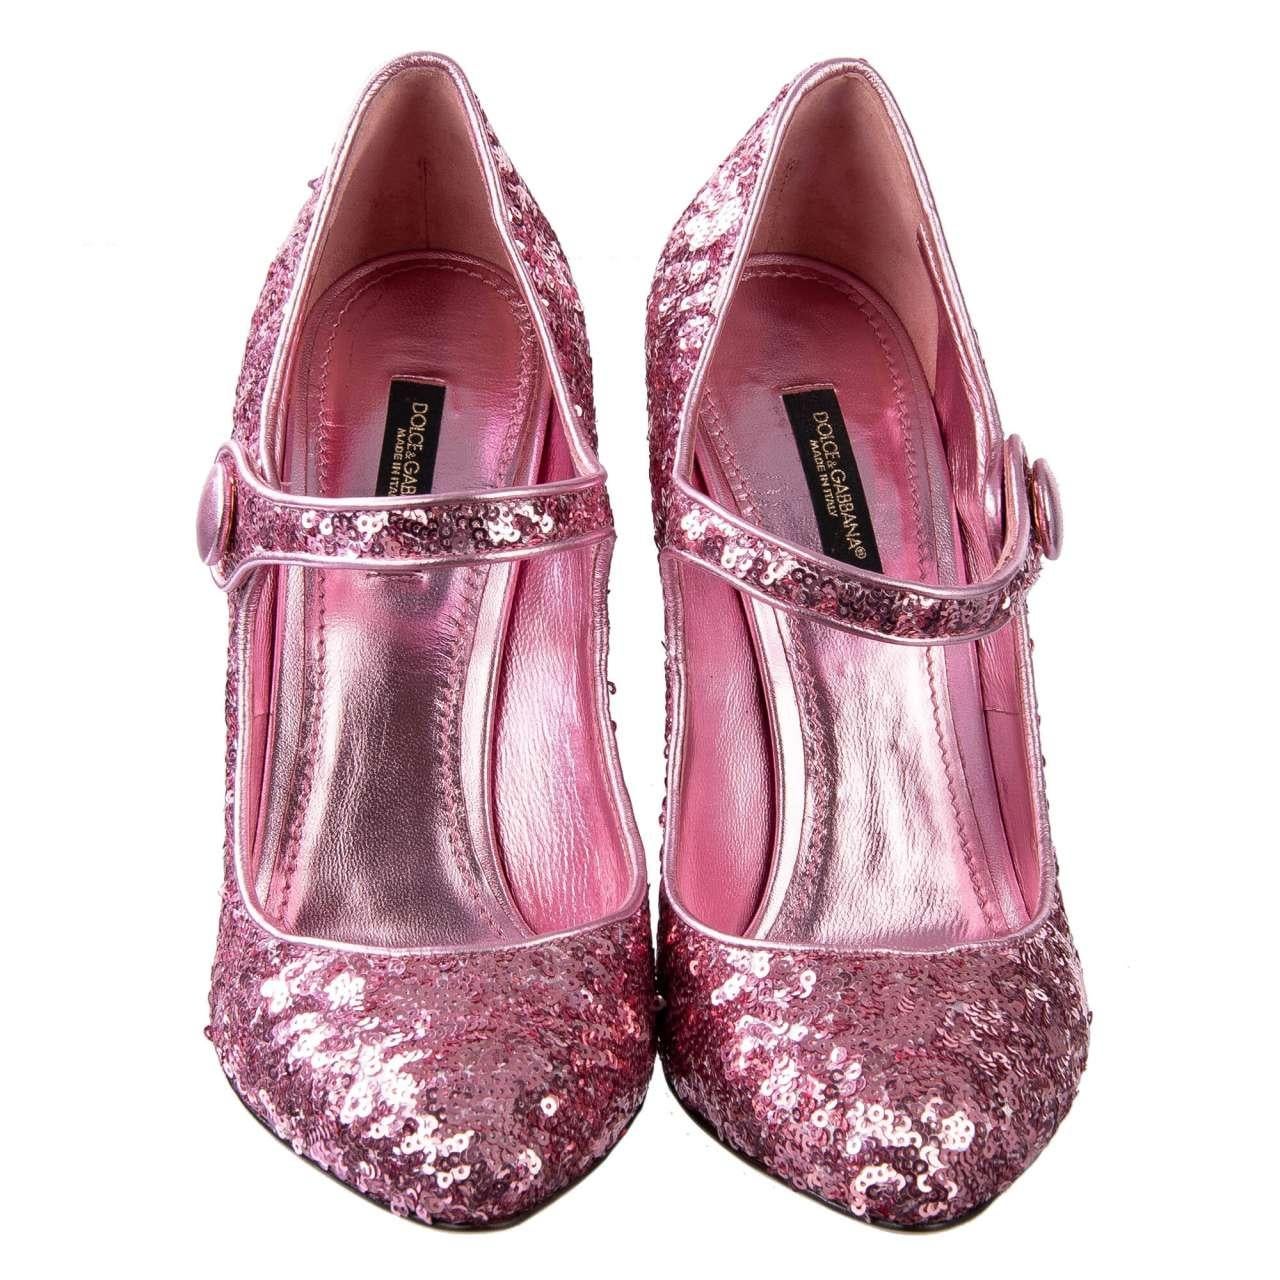 Dolce & Gabbana - Sequined Mary Janes VALLY Pink EUR 39 In Excellent Condition For Sale In Erkrath, DE